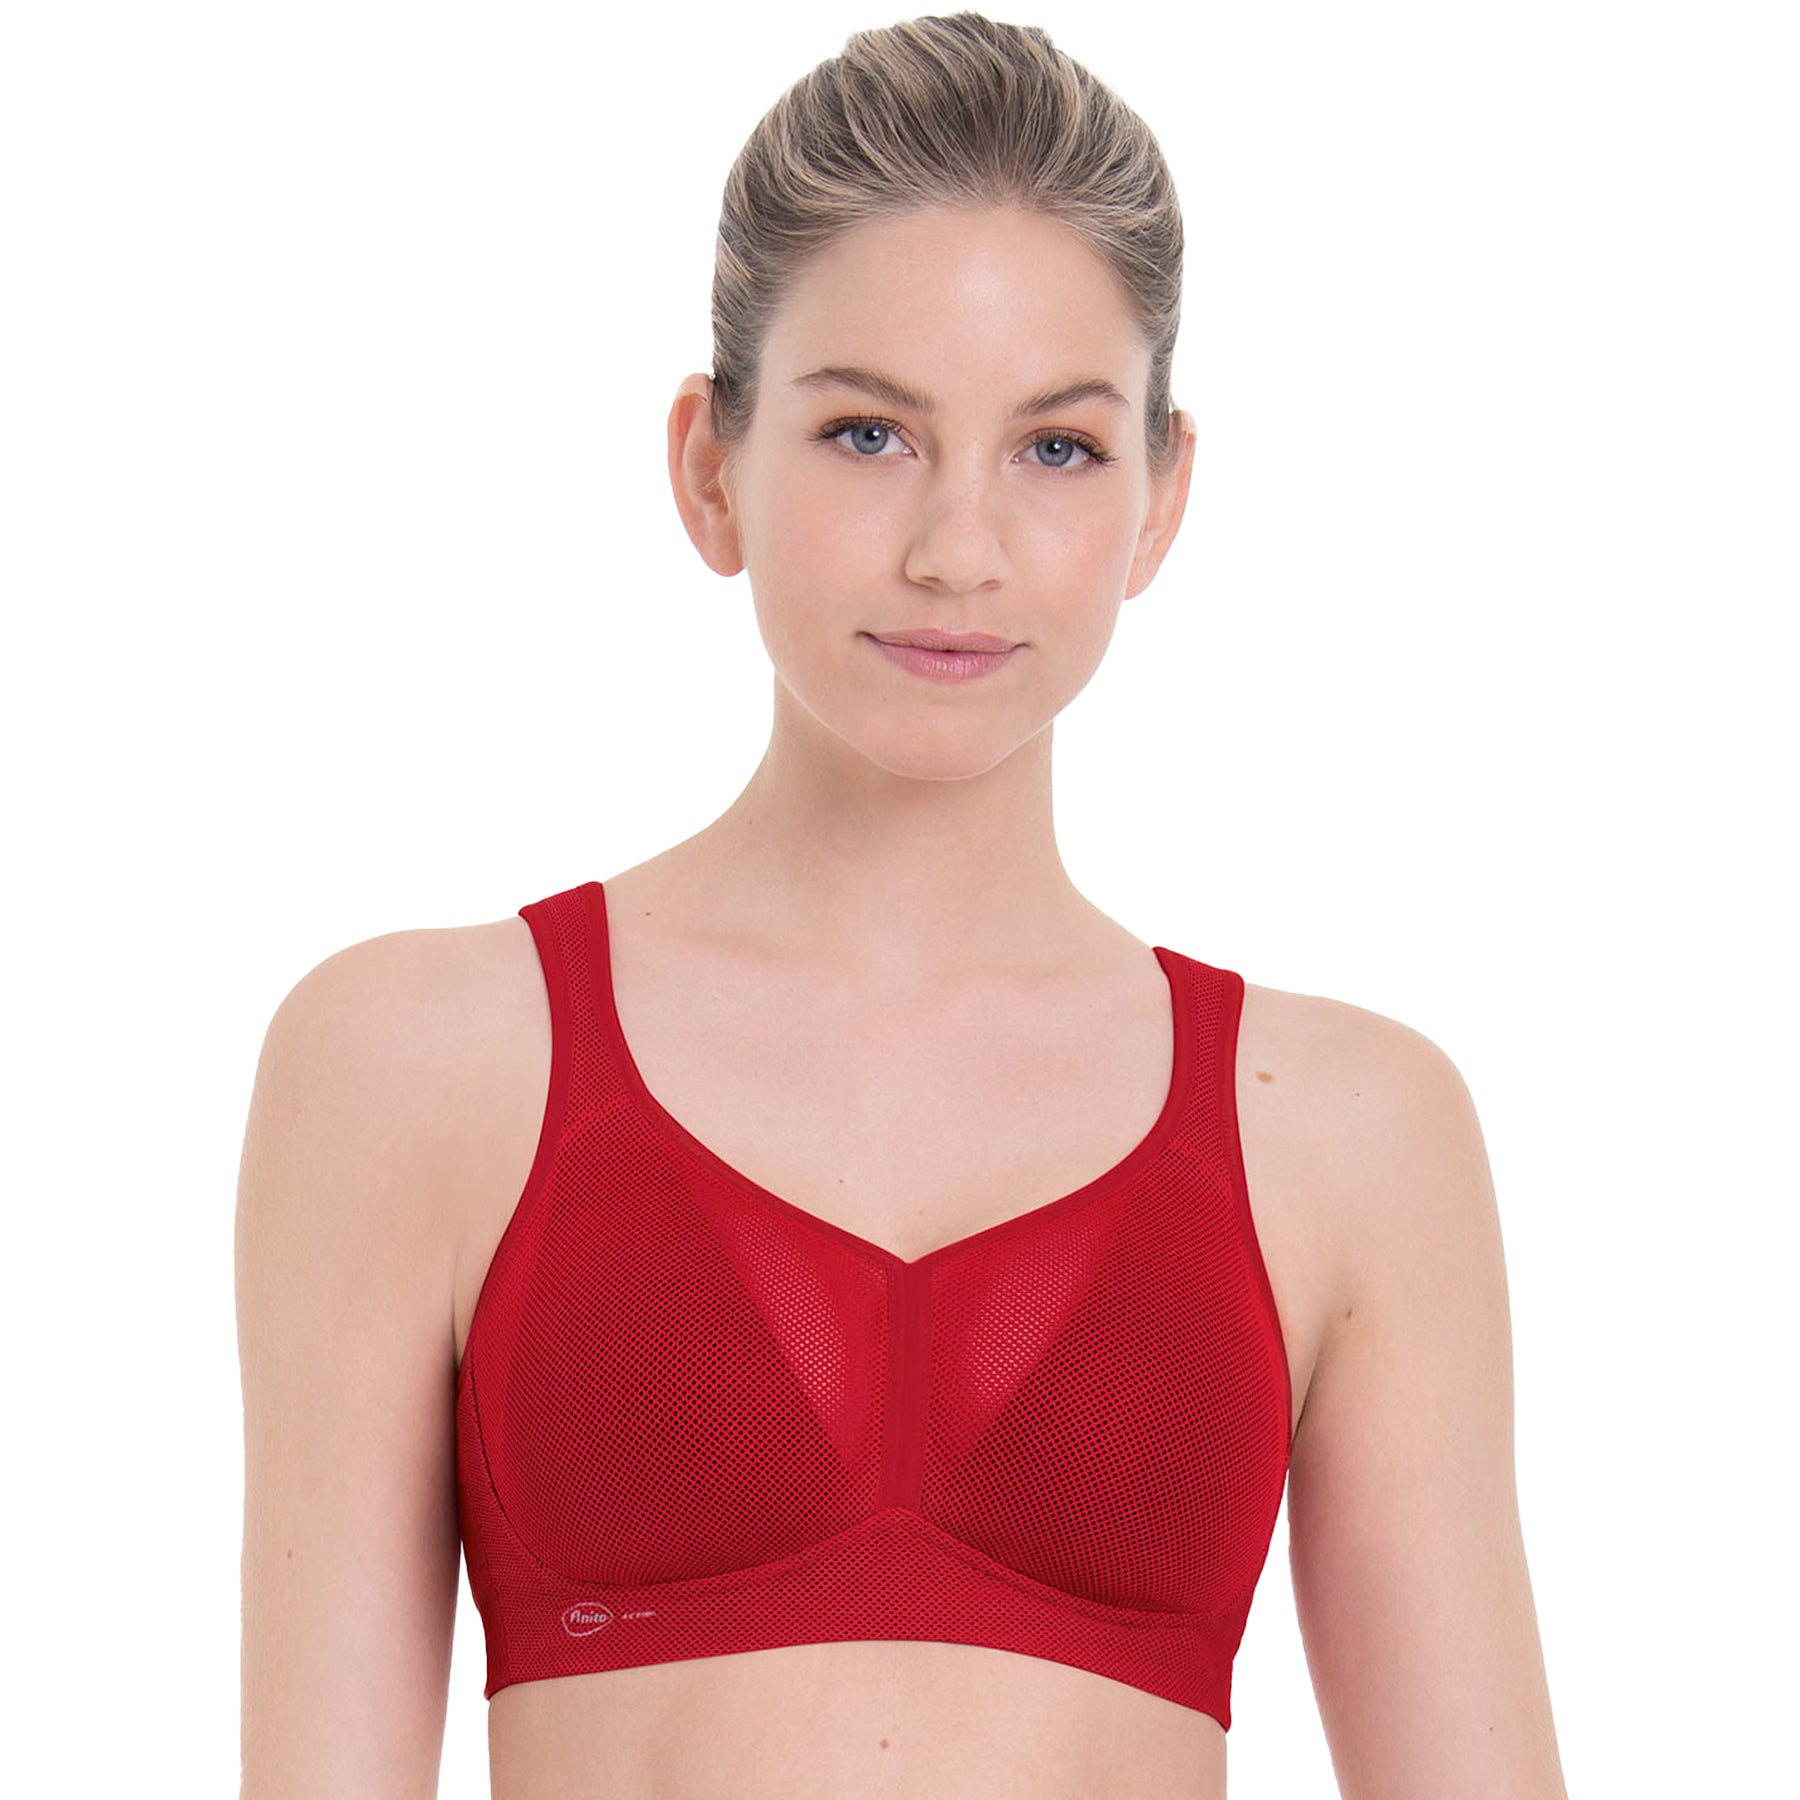 30b Bra, Shop The Largest Collection